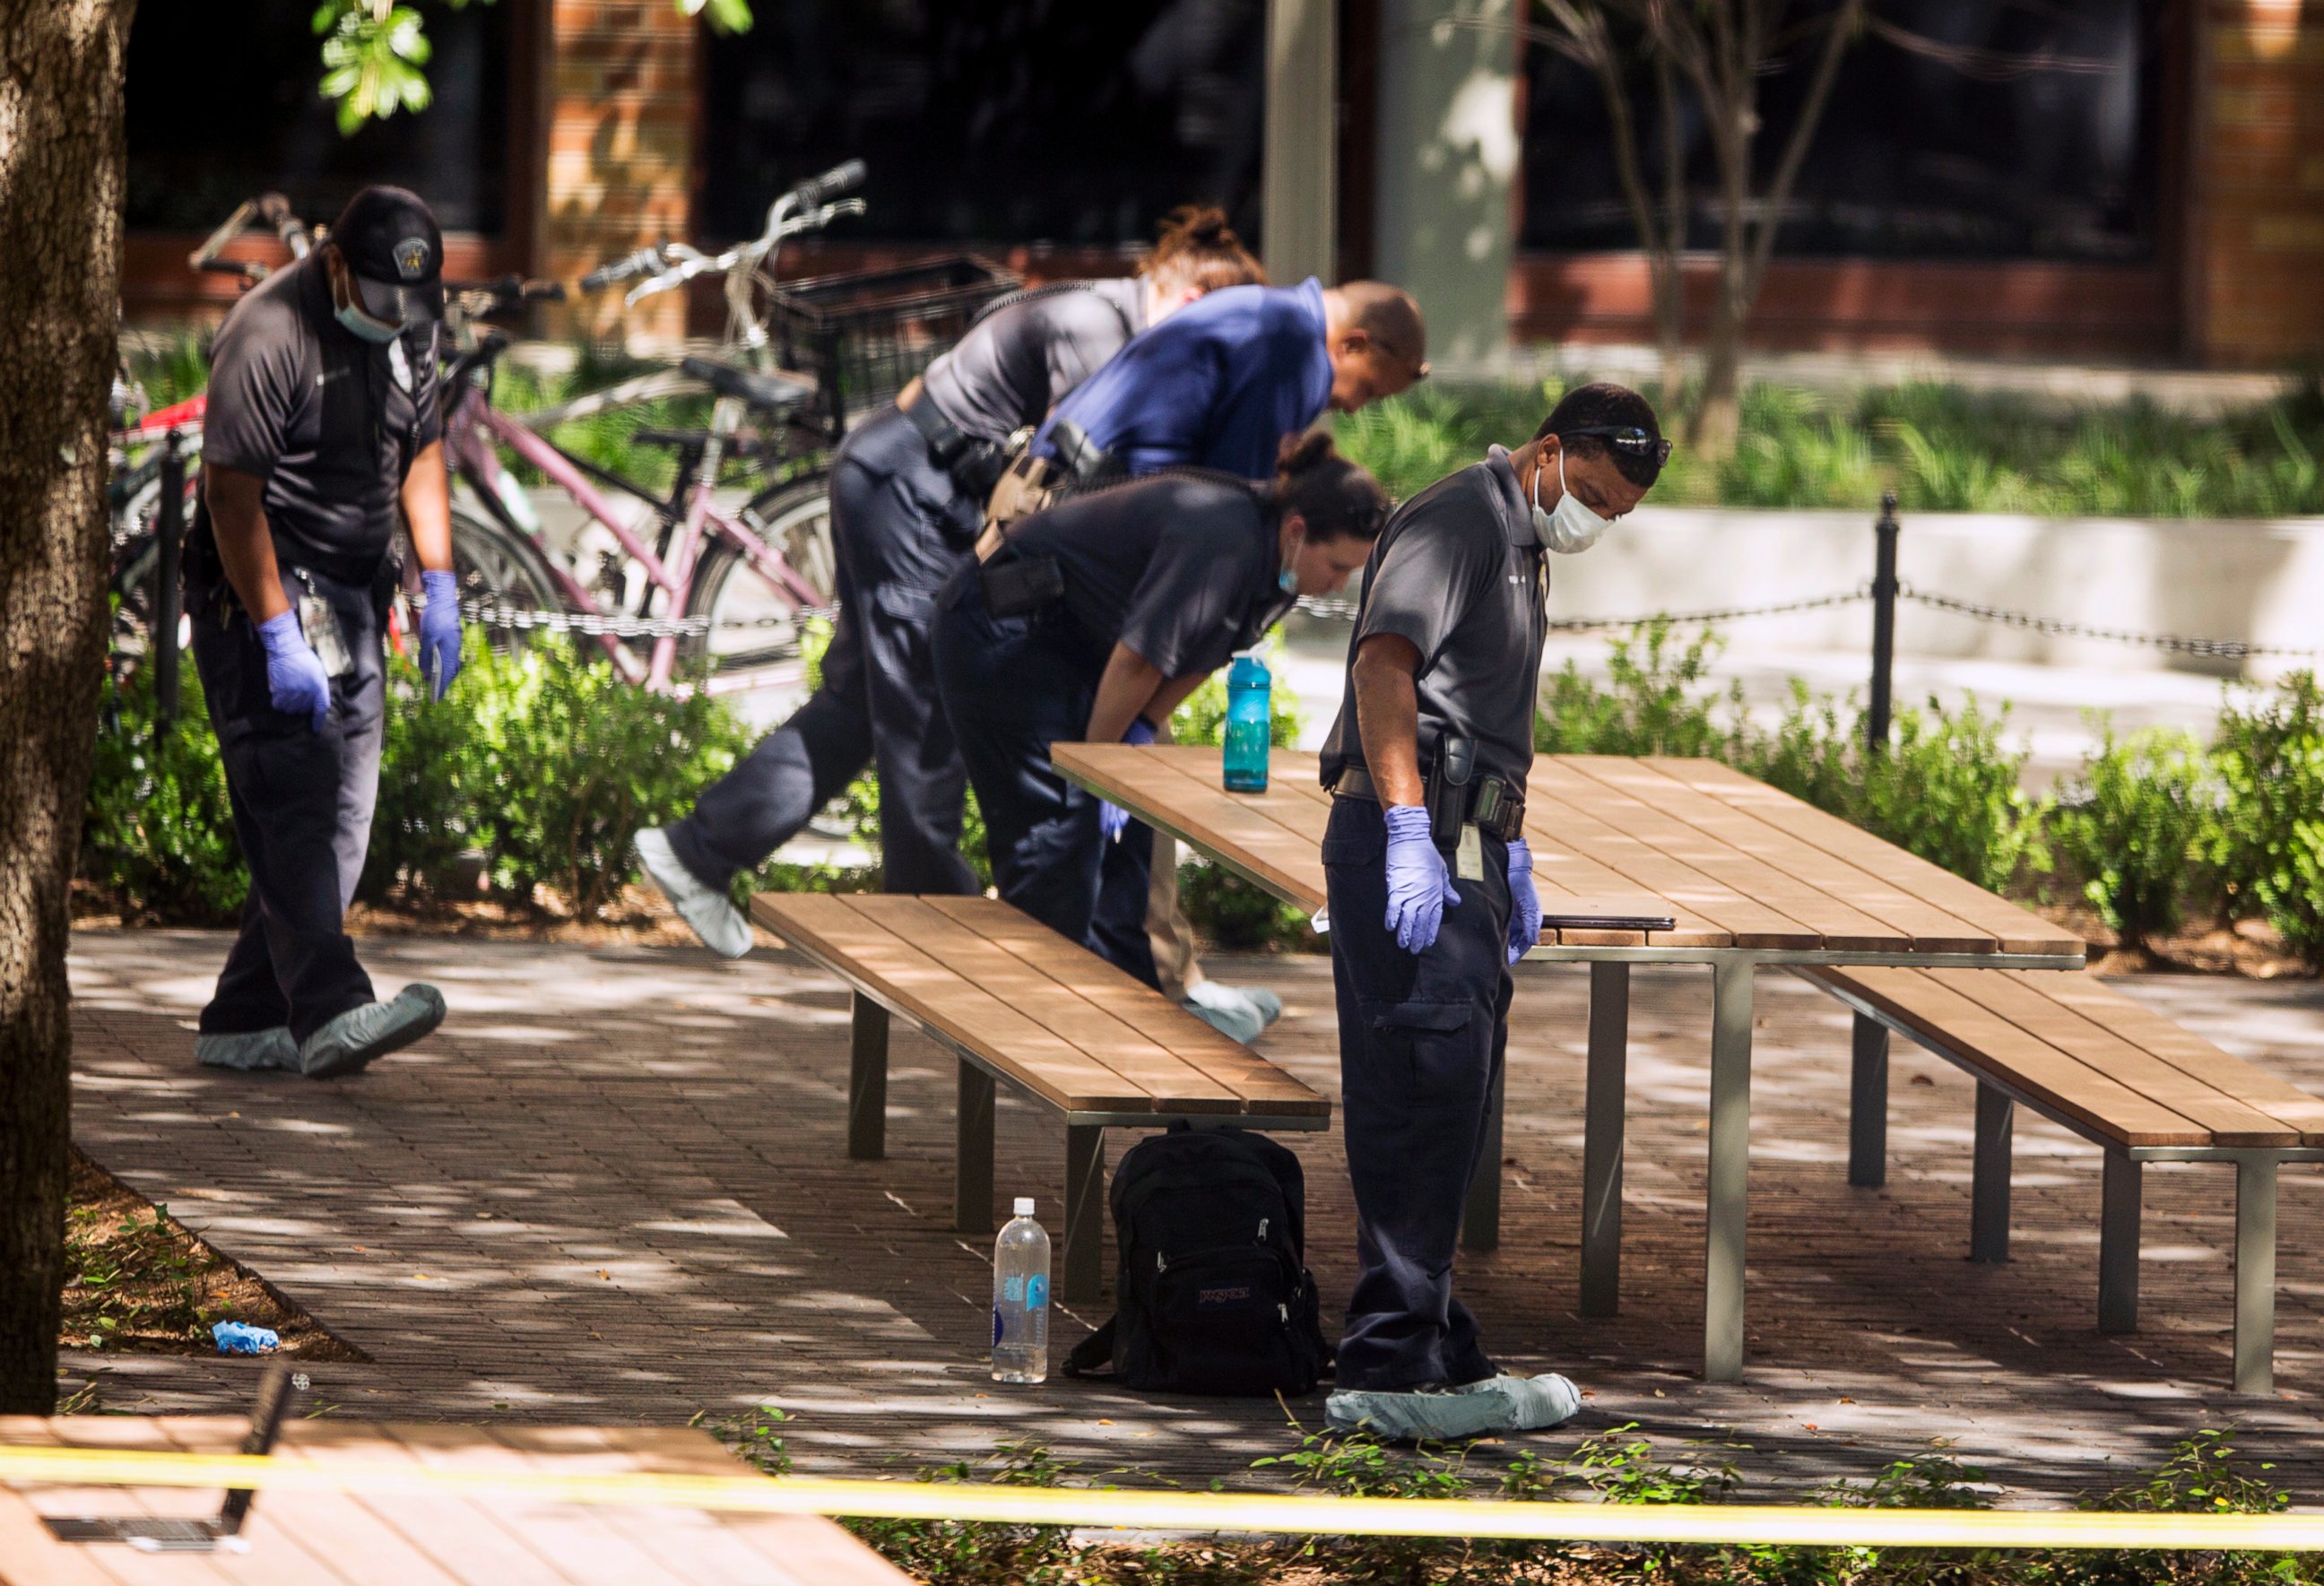 PHOTO: Officials investigate after a fatal stabbing attack at the University of Texas campus, Monday, May 1, 2017, in Austin, Texas.